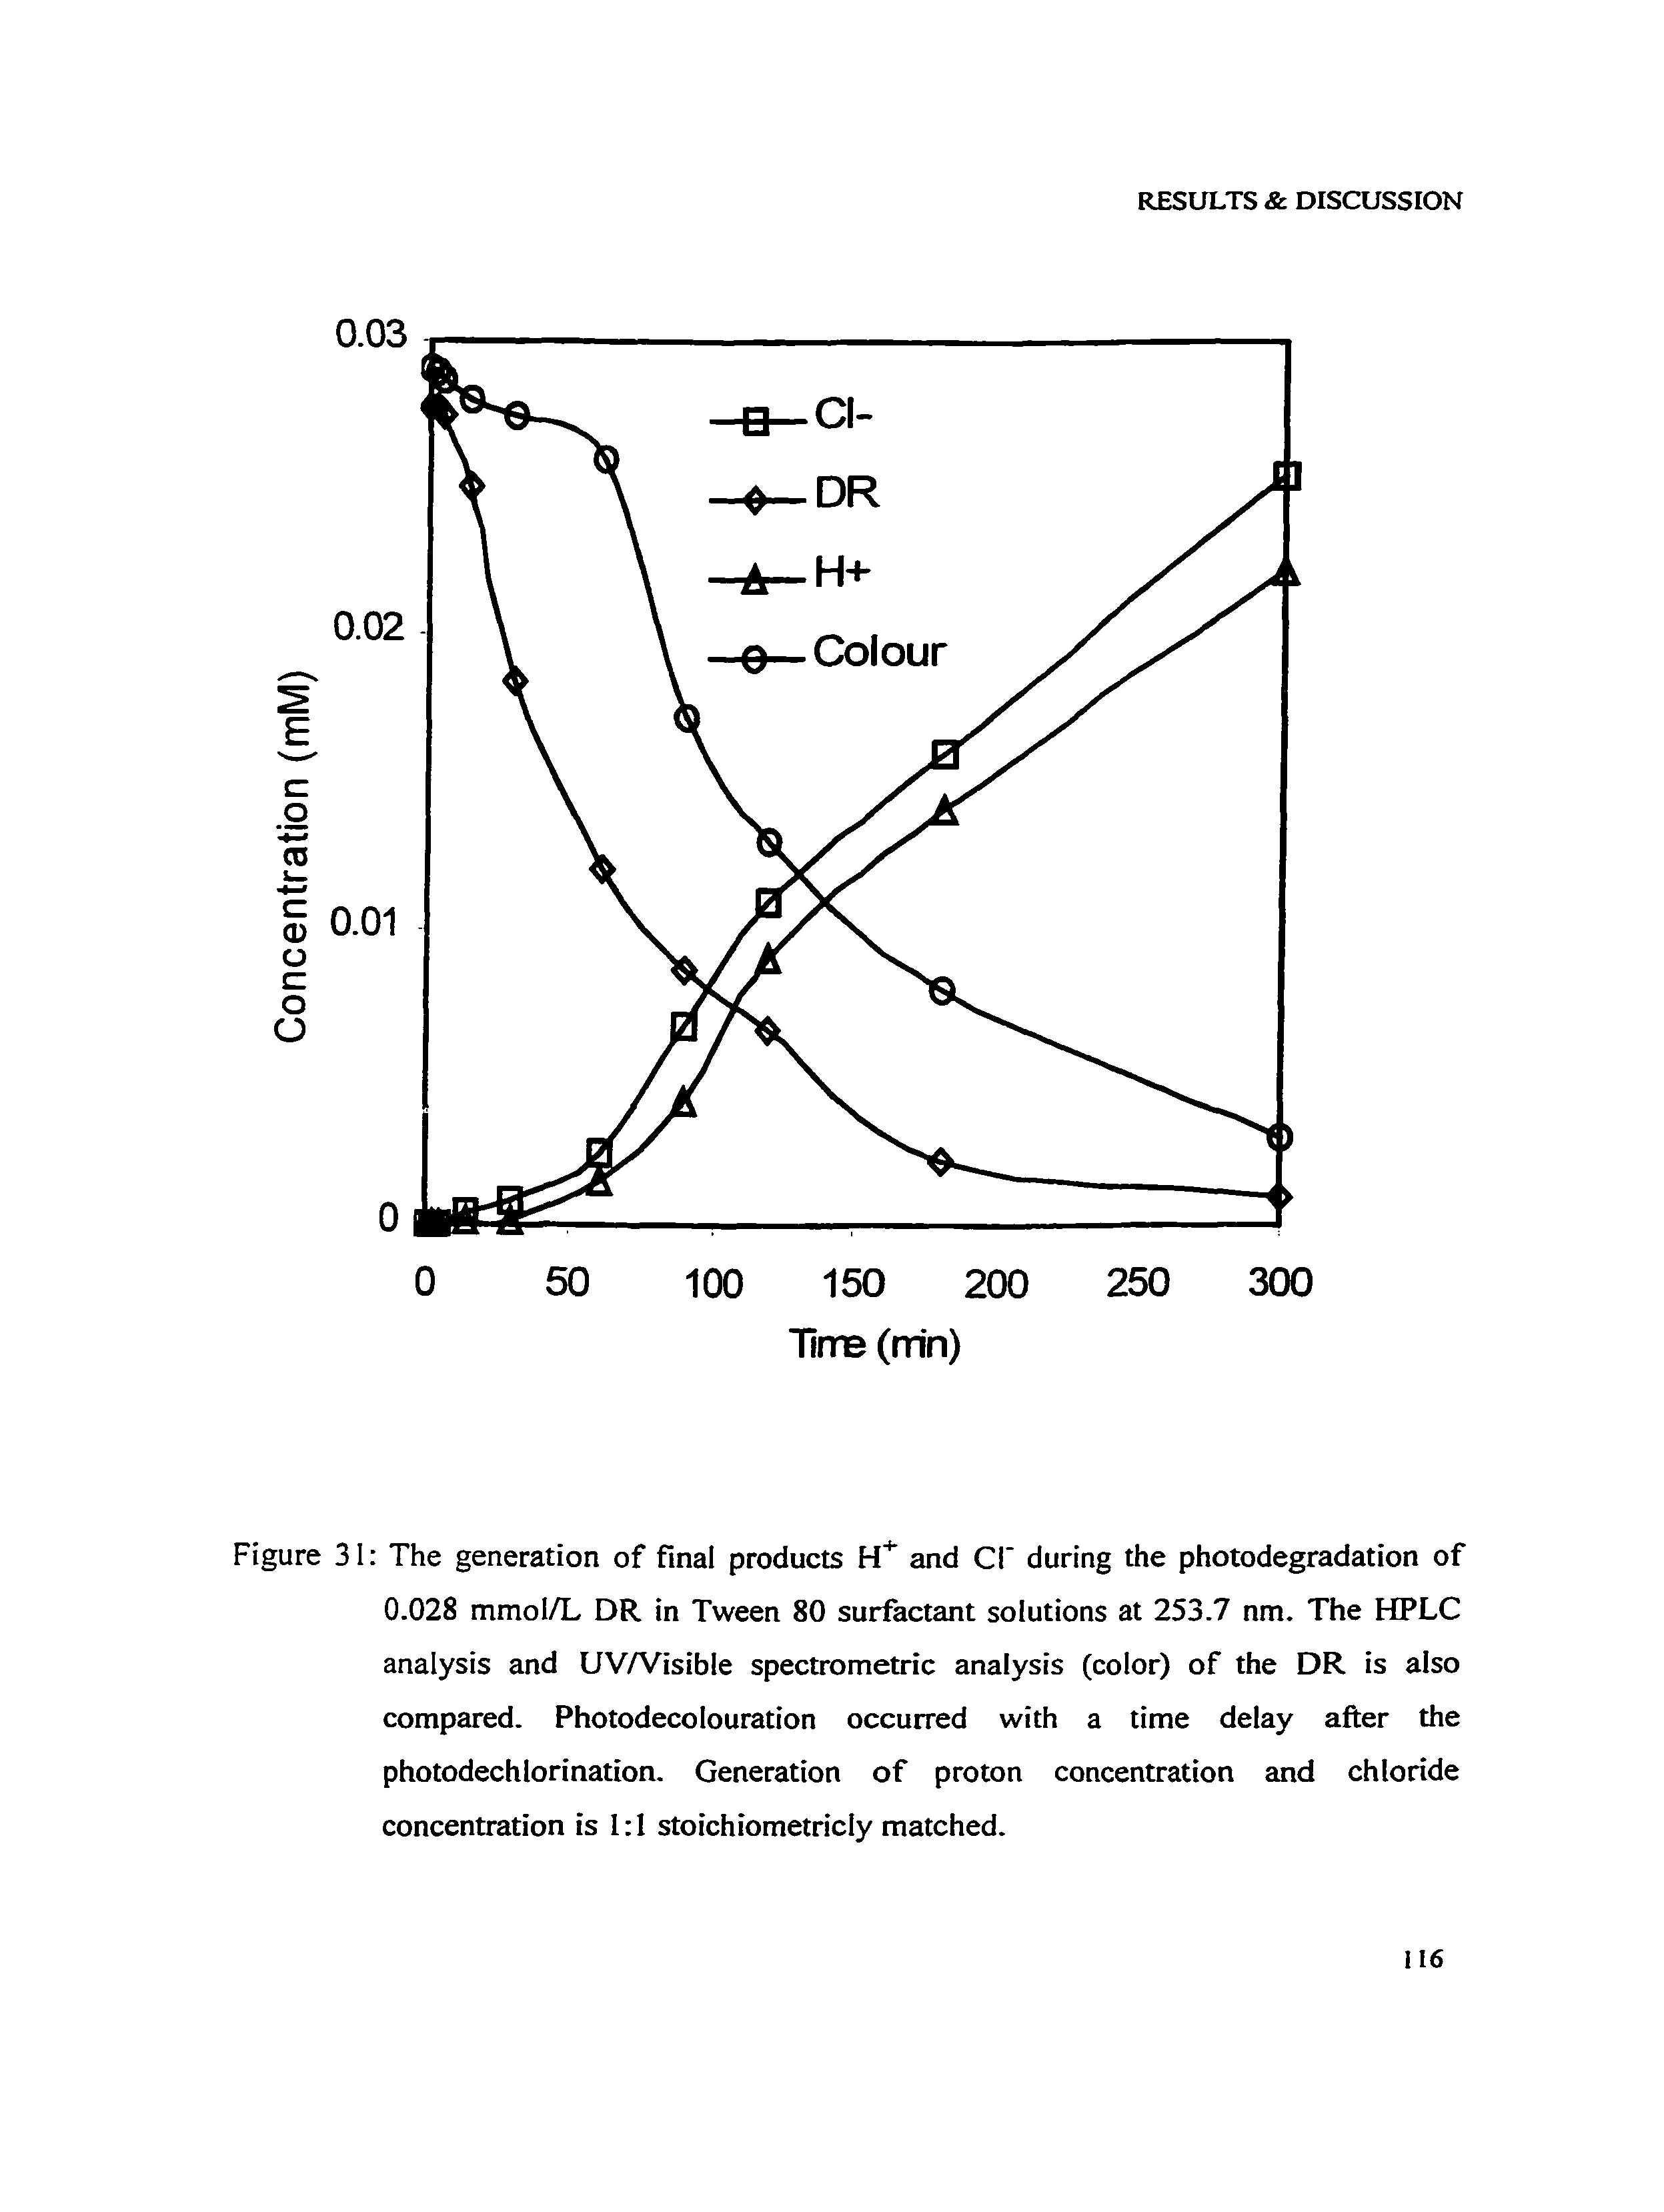 Figure 31 The generation of final products H+ and Cl during the photodegradation of 0.028 mmol/L DR in Tween 80 surfactant solutions at 253.7 nm. The HPLC analysis and UWVisible spectrometric analysis (color) of the DR is also compared. Photodecolouration occurred with a time delay after the photodechlorination. Generation of proton concentration and chloride concentration is 1 1 stoichiometricly matched.